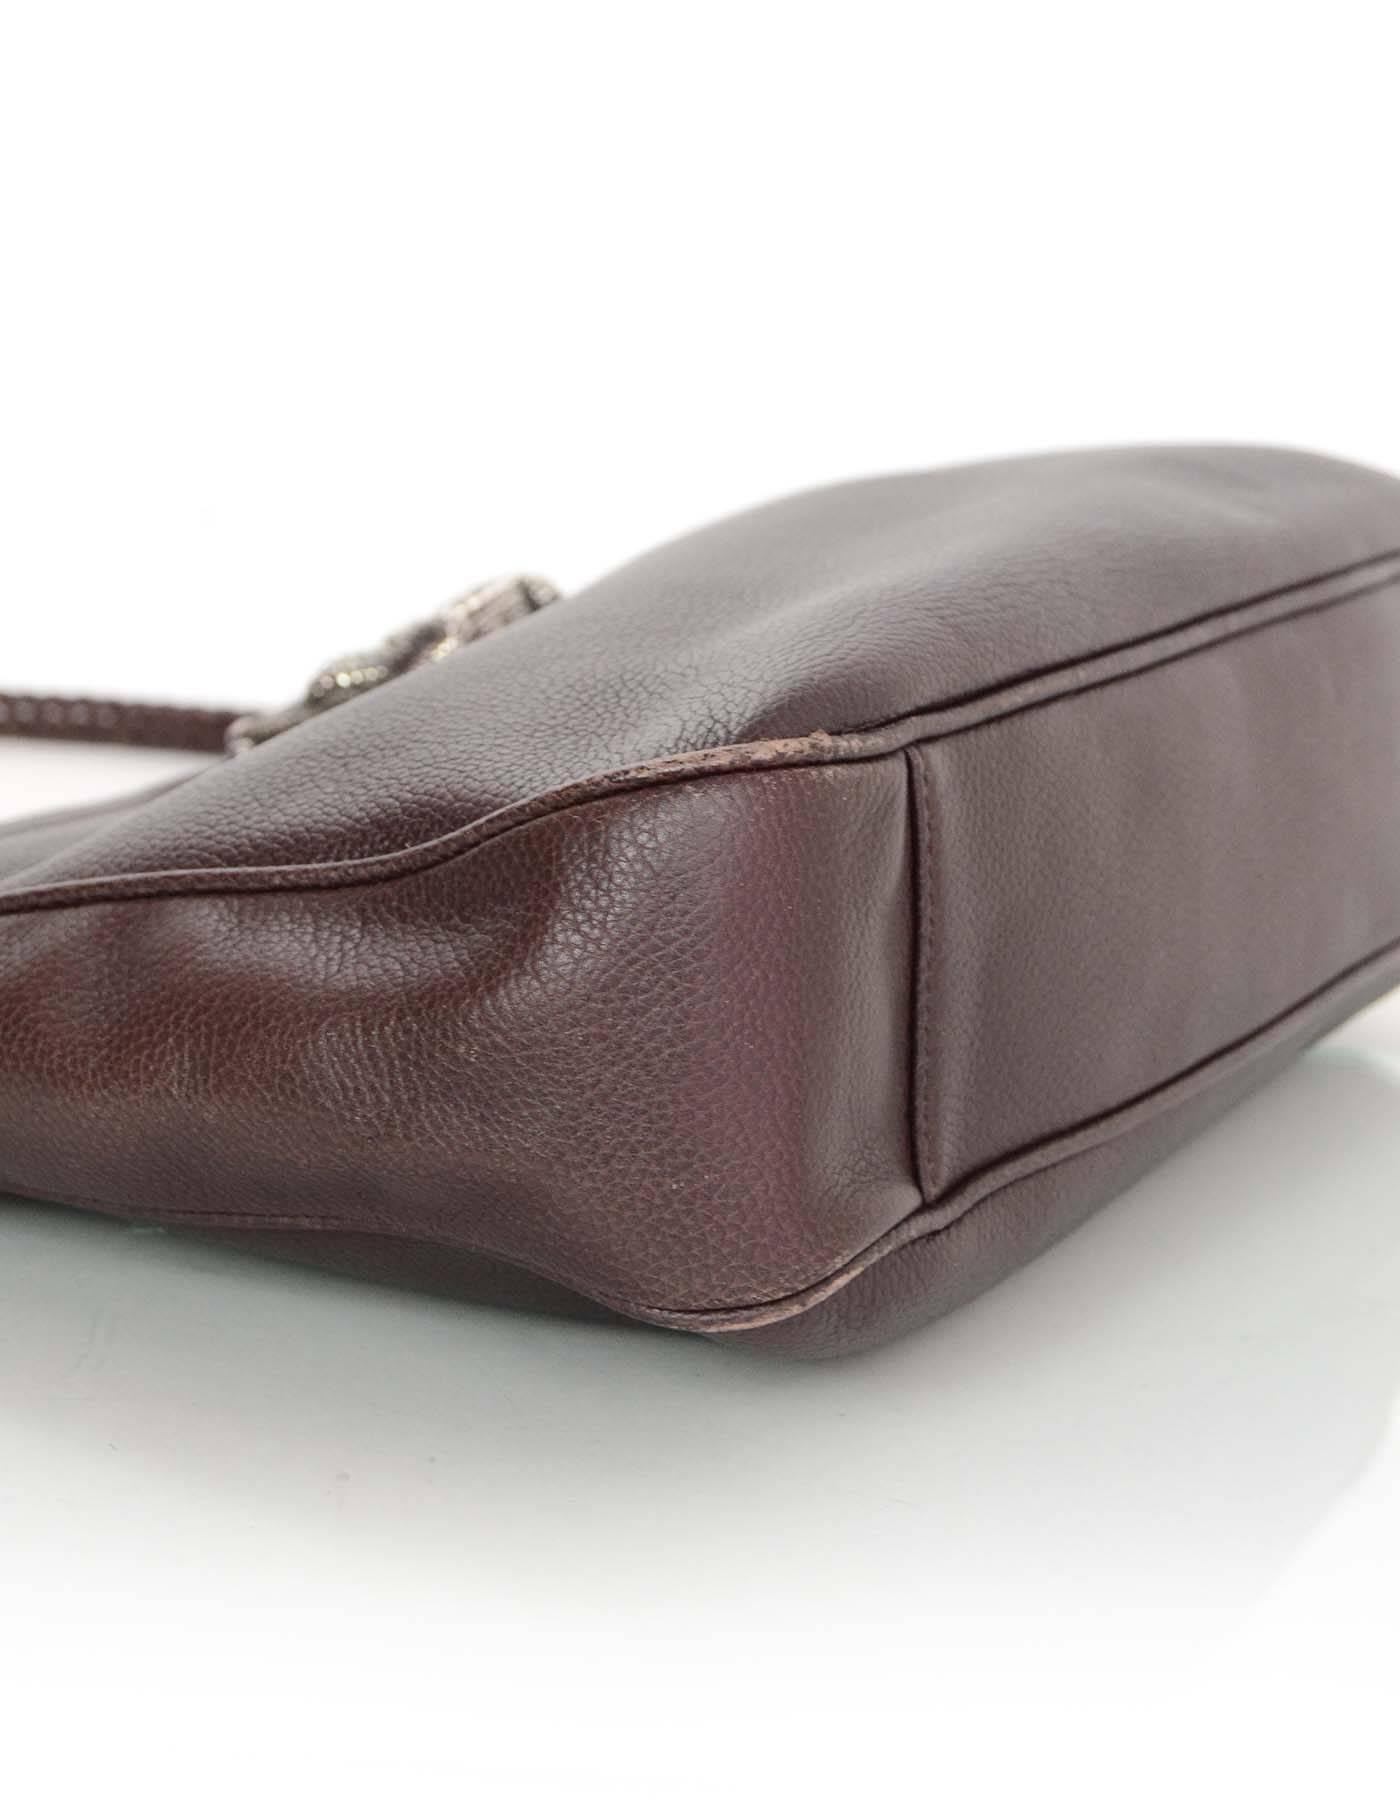 Barry Kieselstein-Cord Brown Leather Shoulder Bag SHW In Excellent Condition In New York, NY